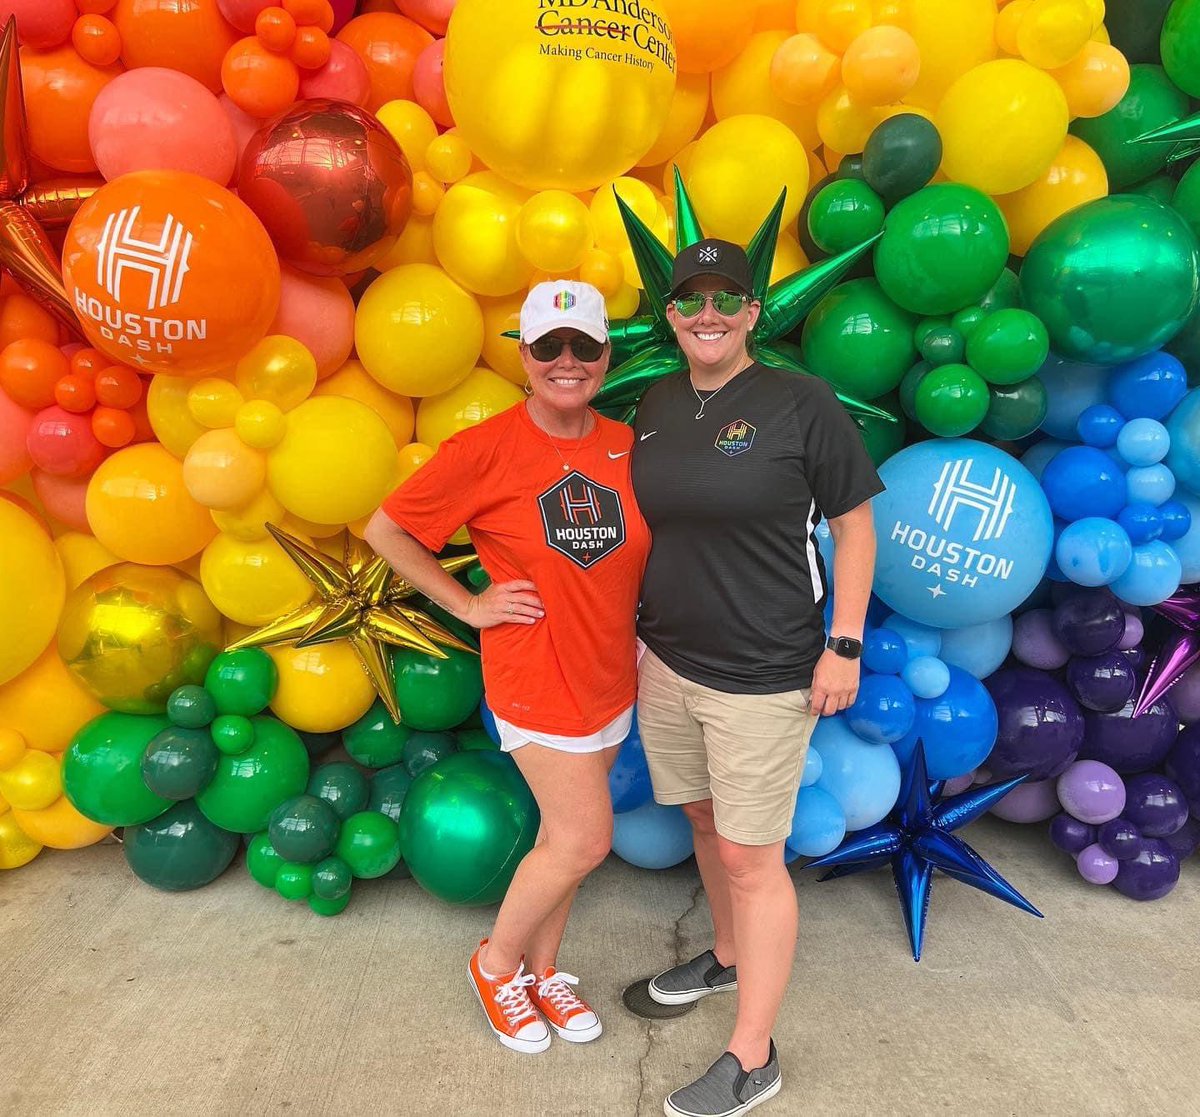 Pride night at @HoustonDash with the little sis - tough loss but we still had a Sunday FUNday eve and snagged a photo @MDAndersonNews photo booth #endcancer